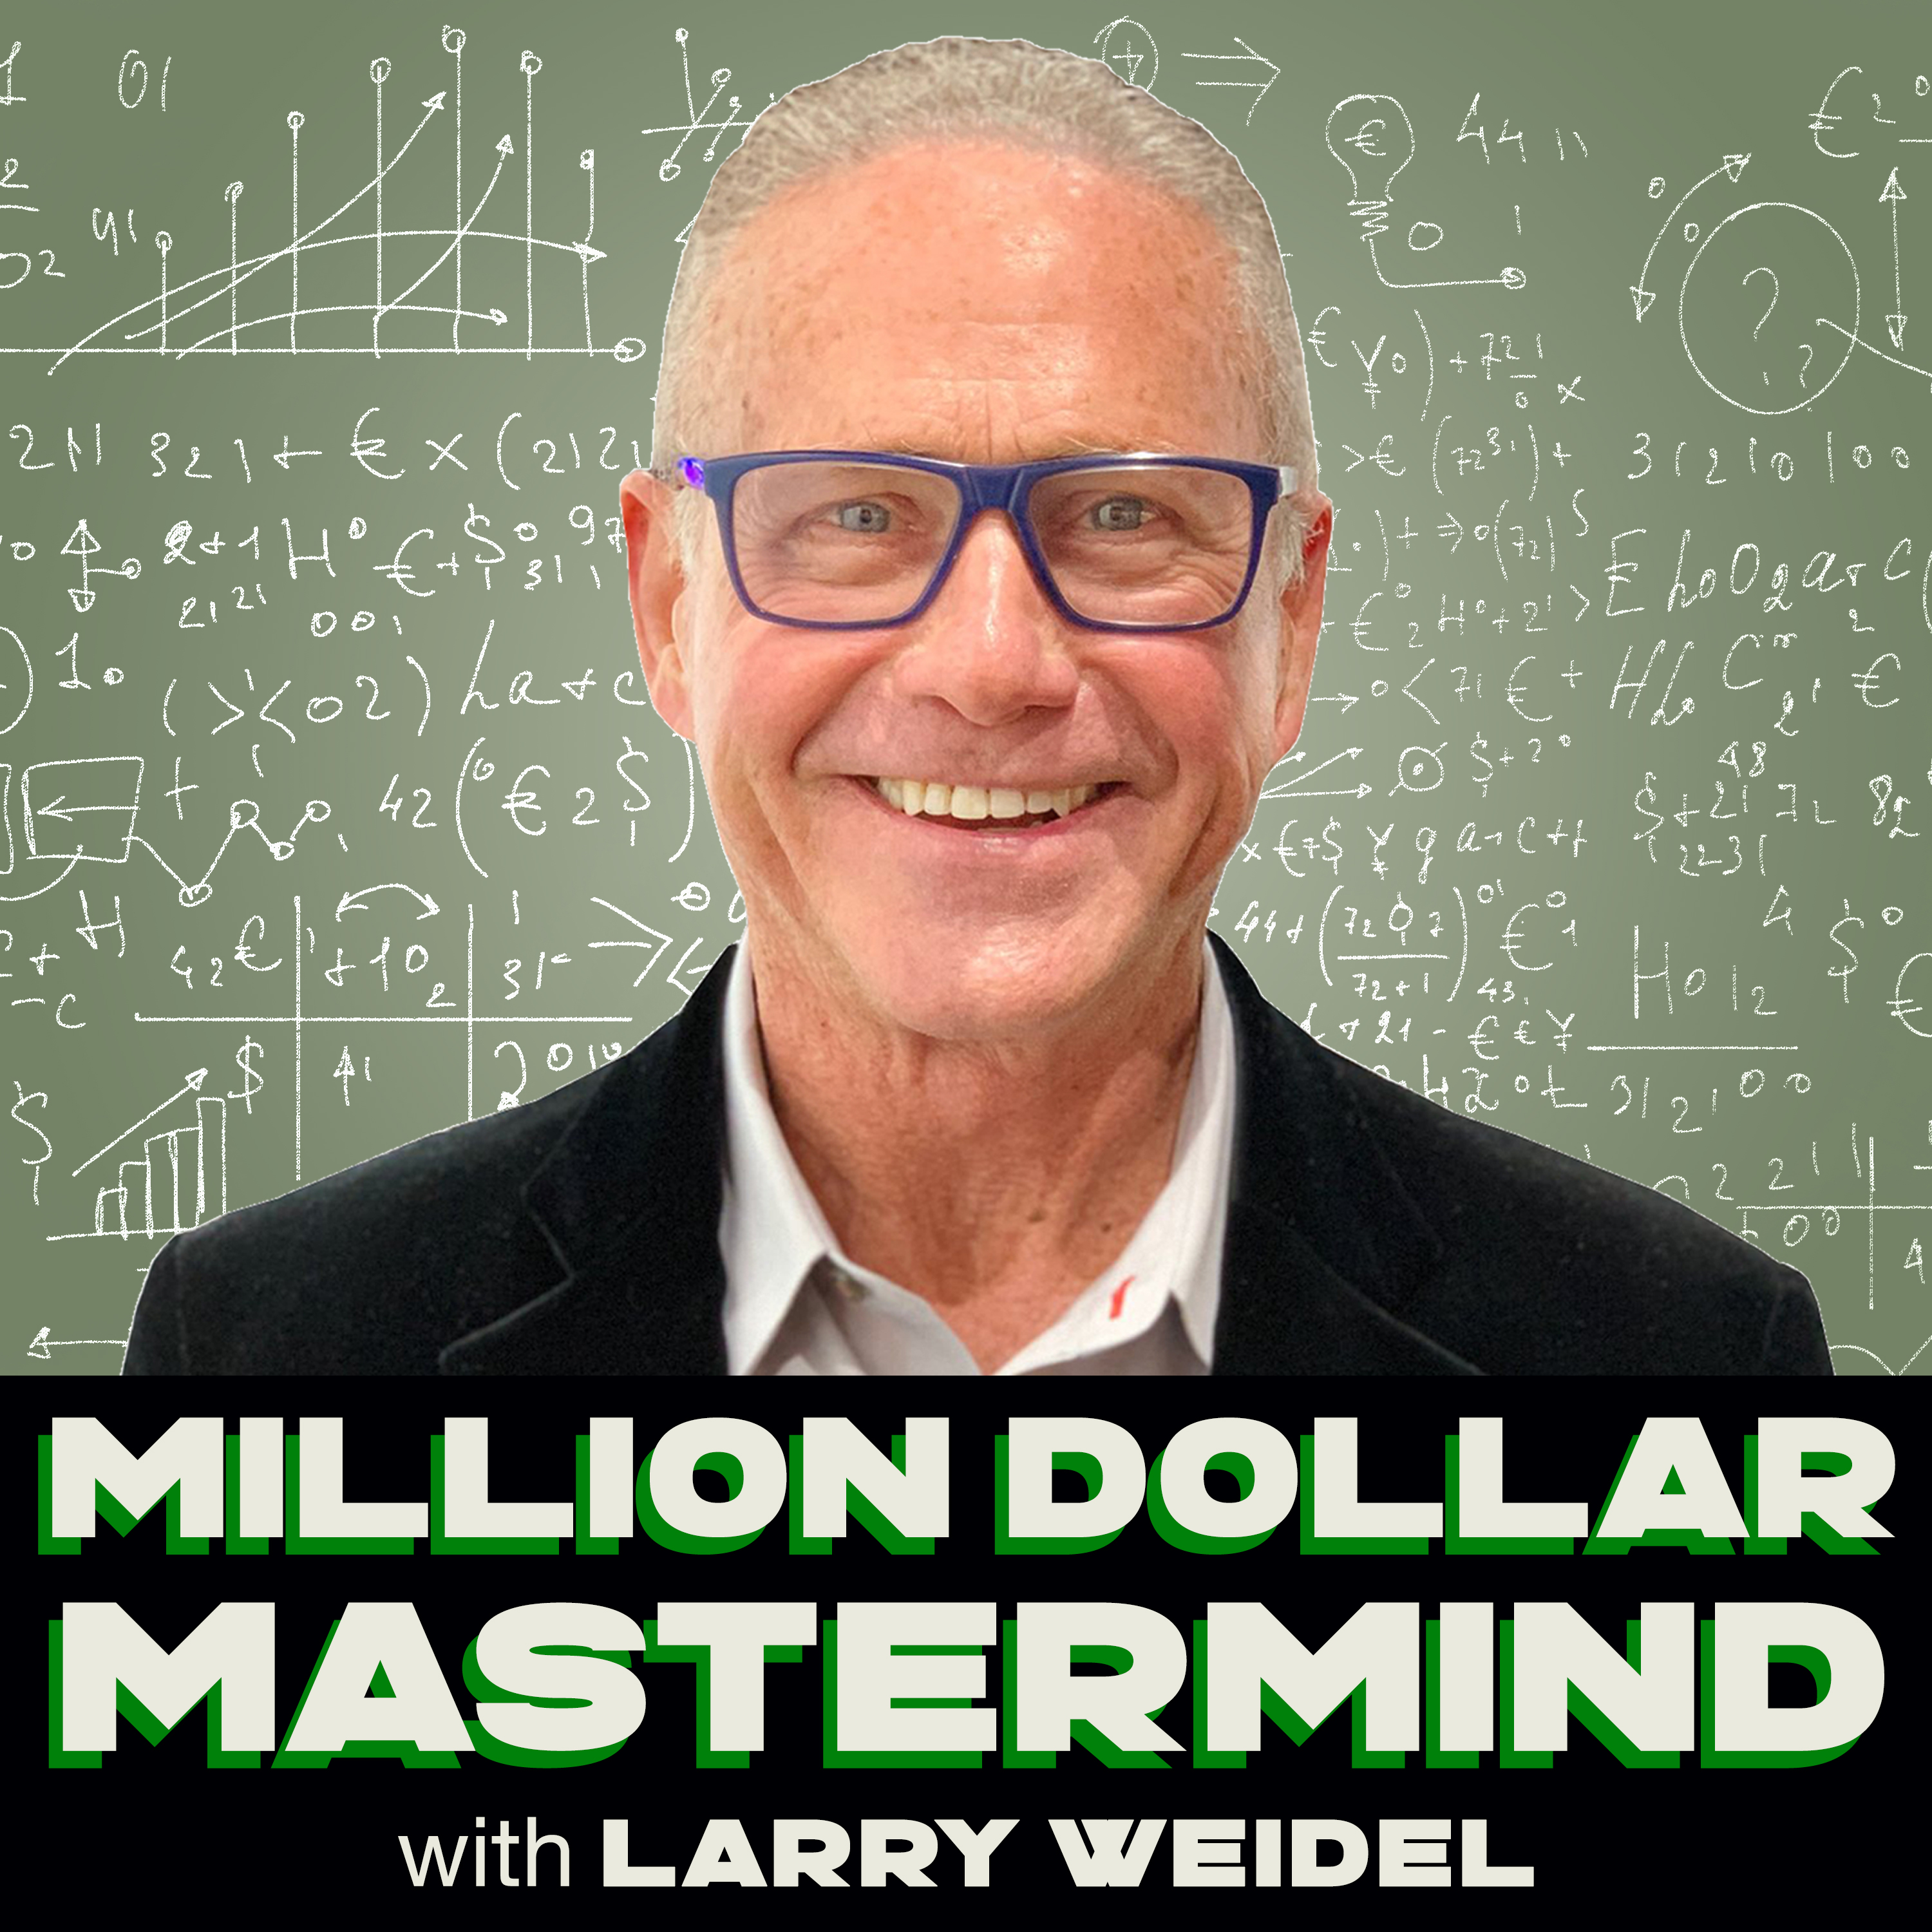 Episode 55: The Mindset That Makes Million Dollar Earners with Millionaire Andy Young